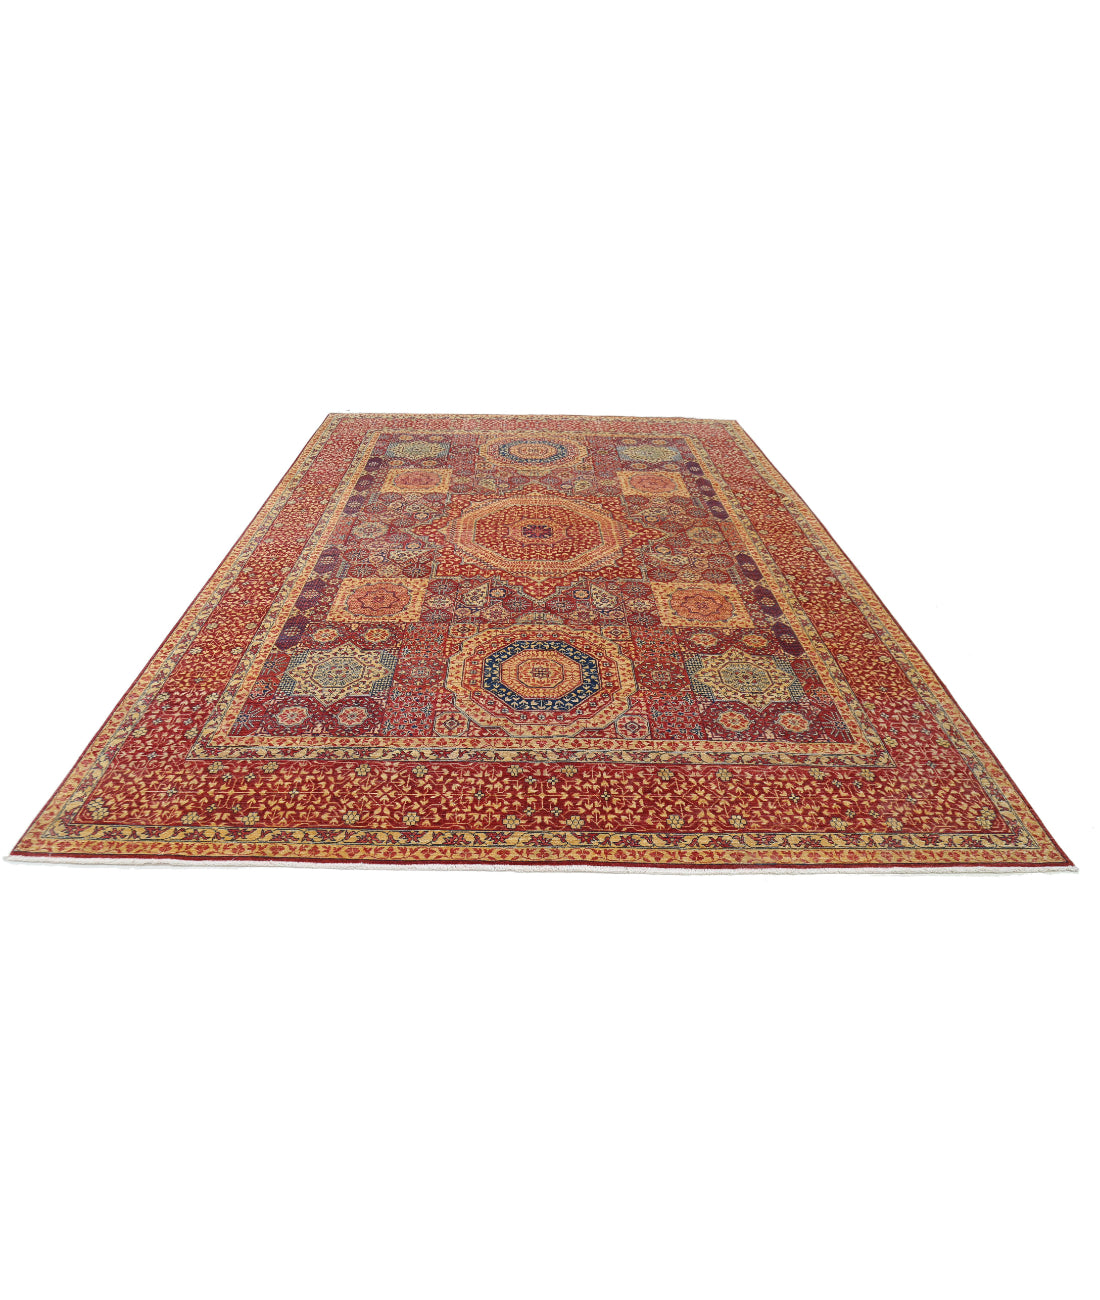 Hand Knotted Mamluk Wool Rug - 8'10'' x 12'8'' 8'10'' x 12'8'' (265 X 380) / Red / Beige